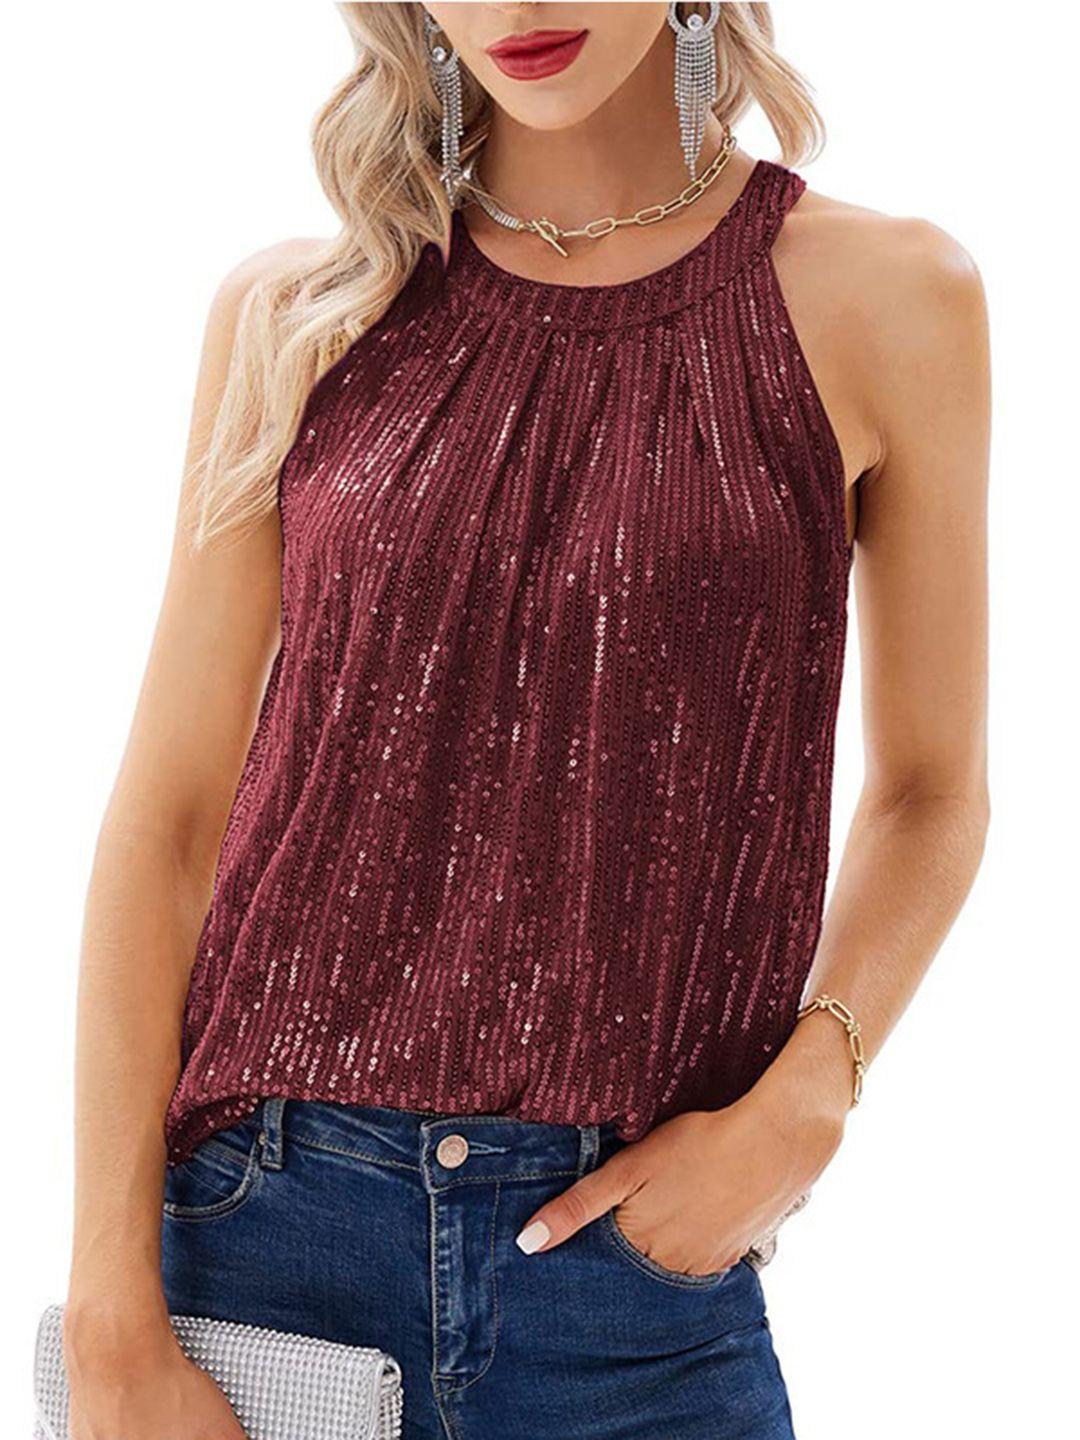 stylecast brown embellished round neck top